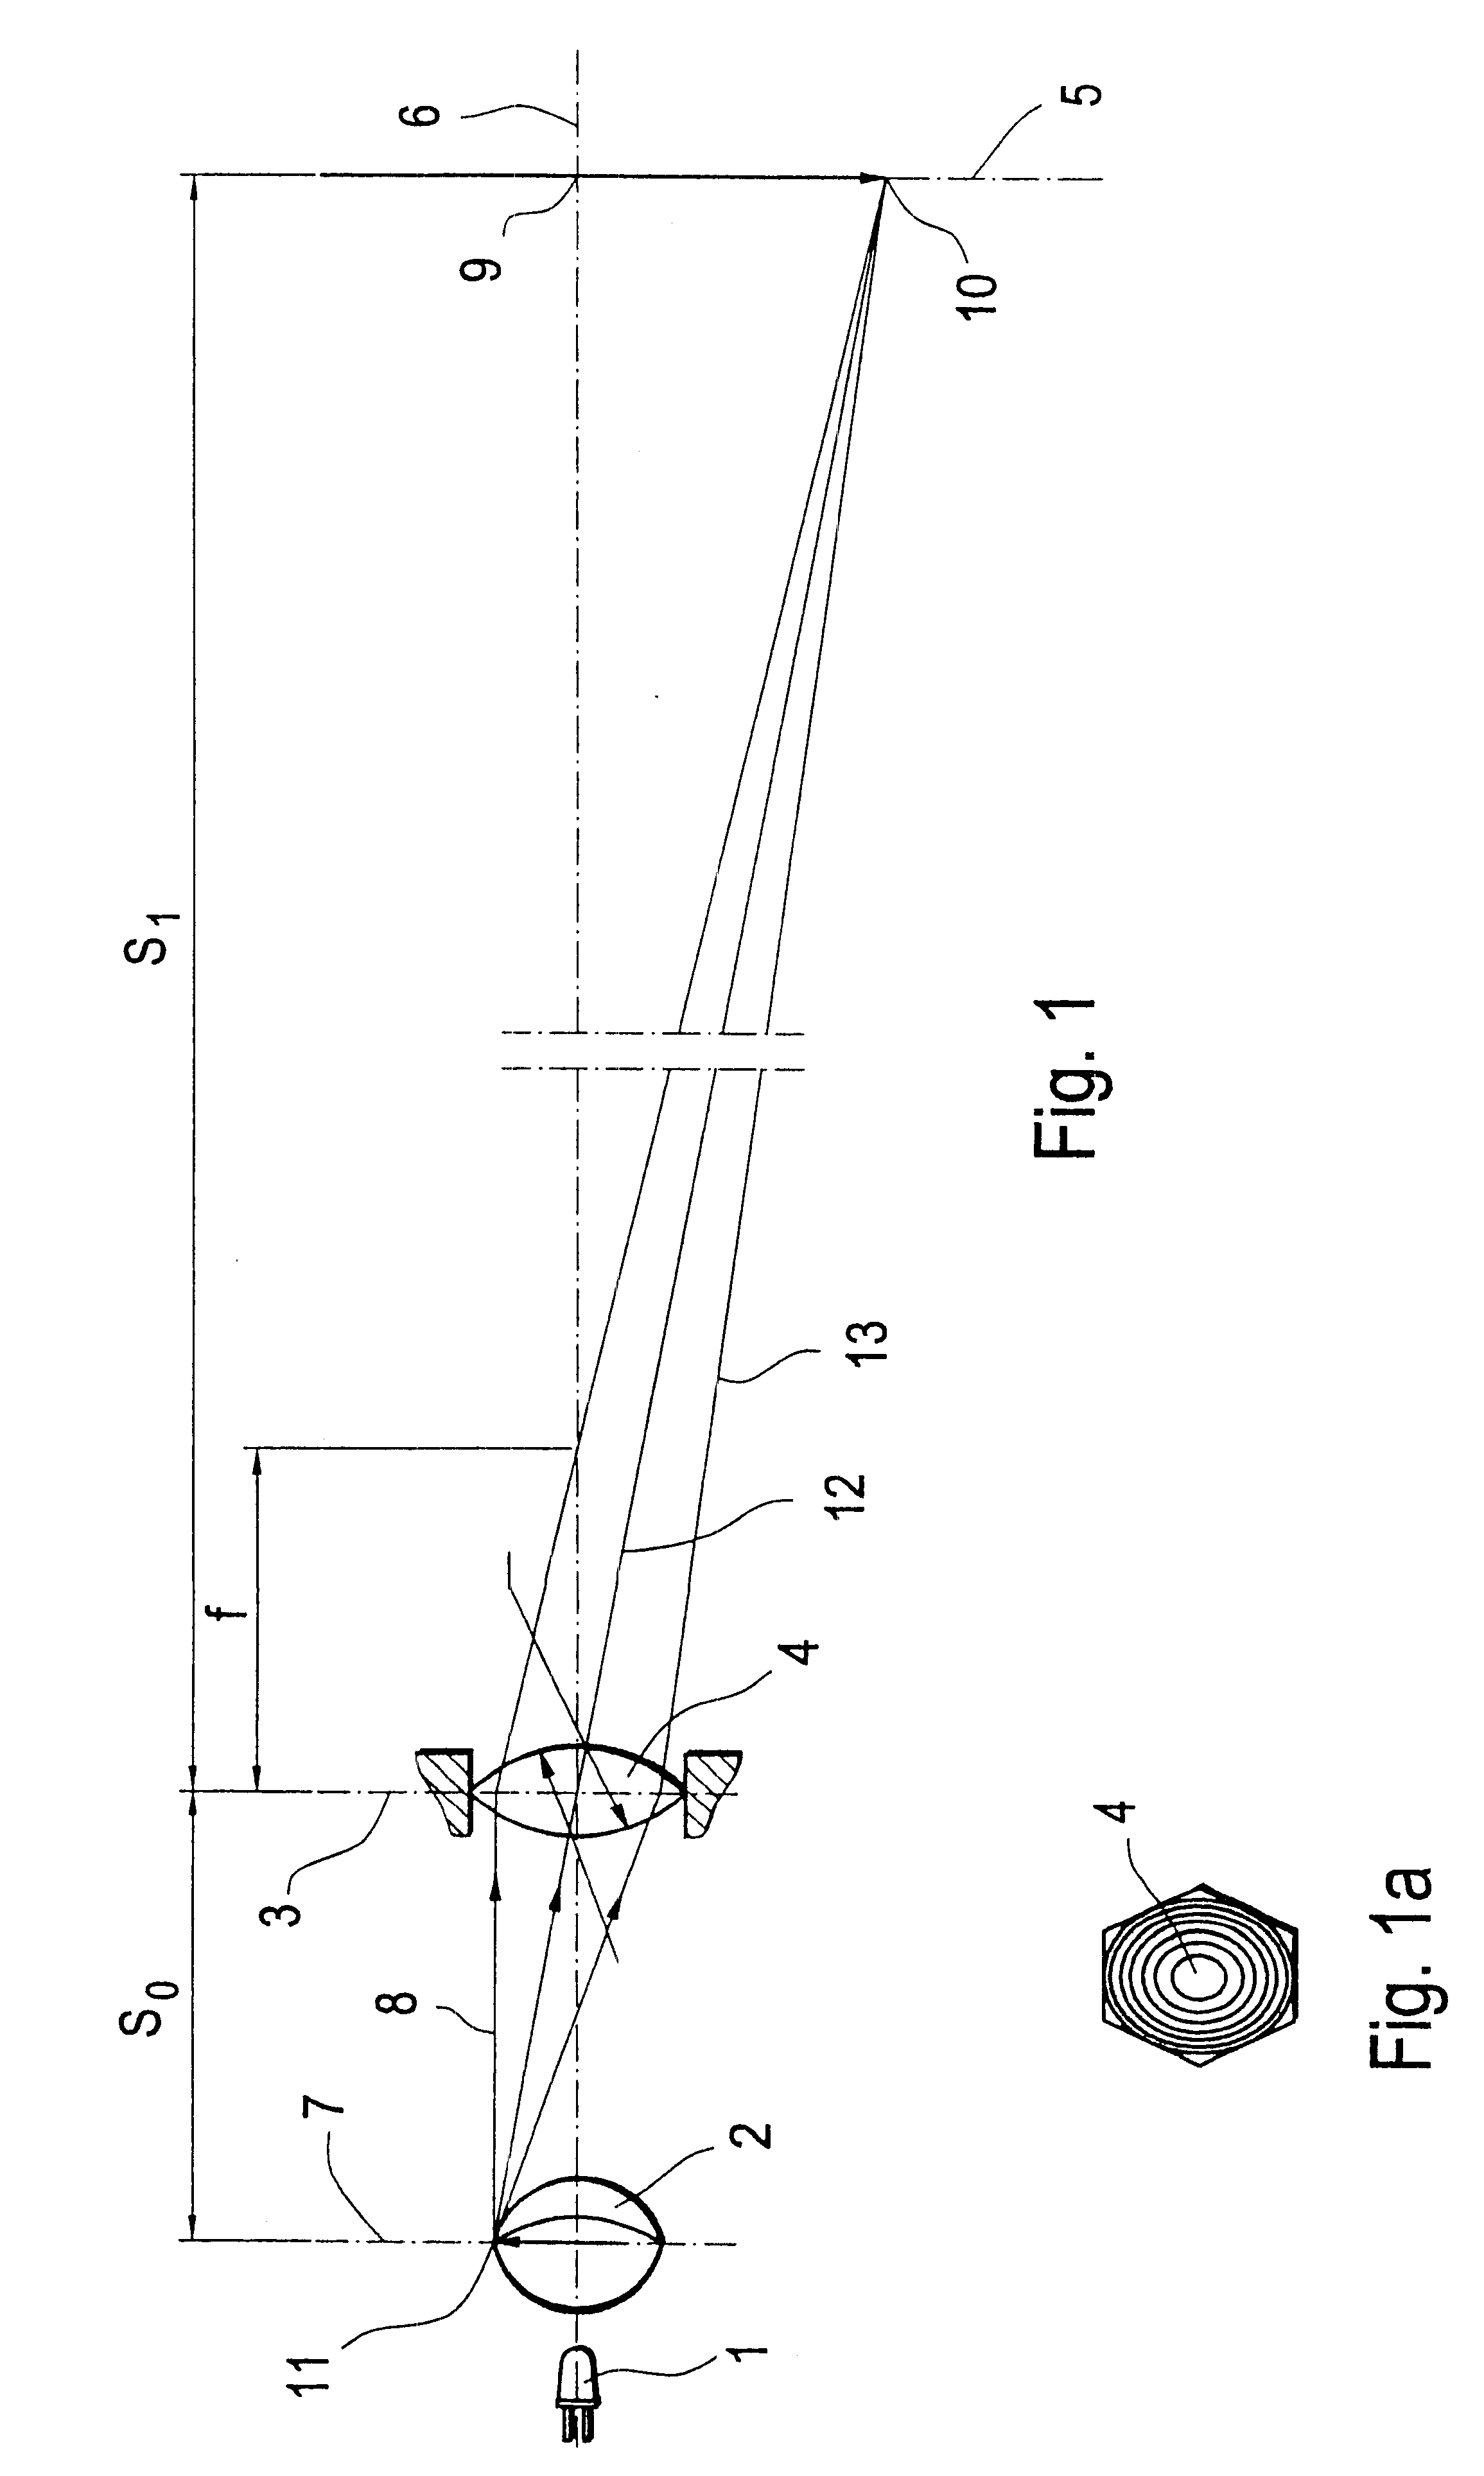 Apparatus for lighting spaces, bodies or surfaces